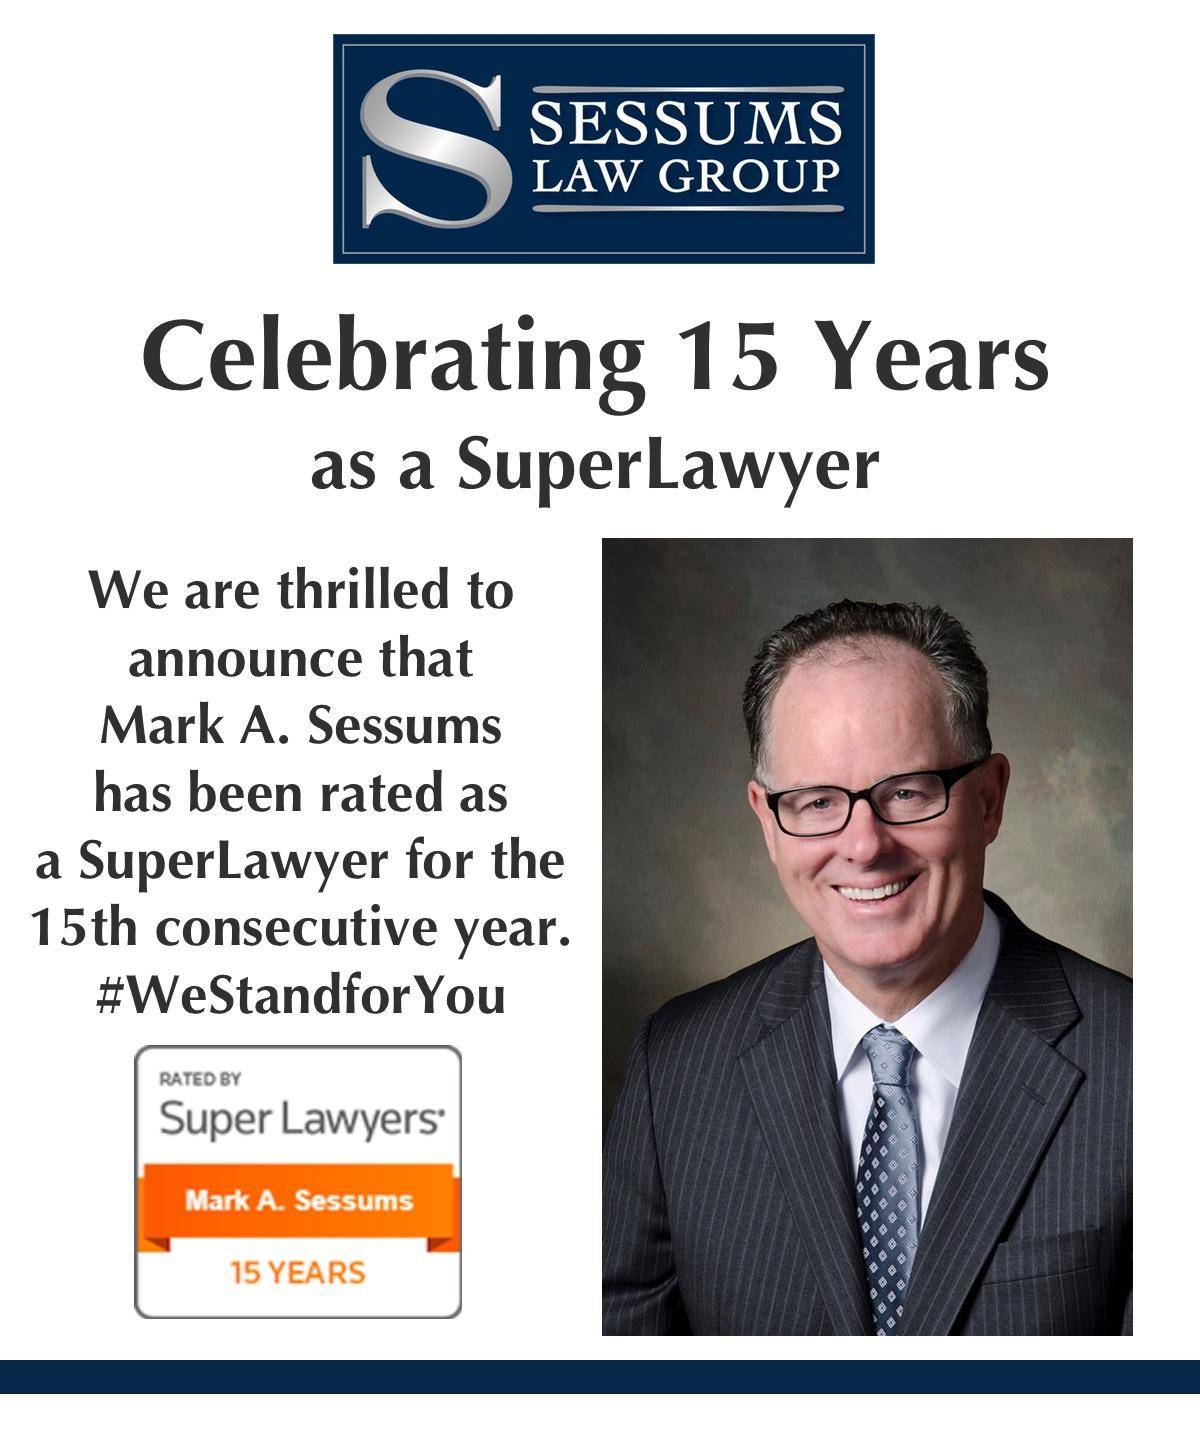 Sessums Law Group - Mark Sessums Recognized as a SuperLawyer